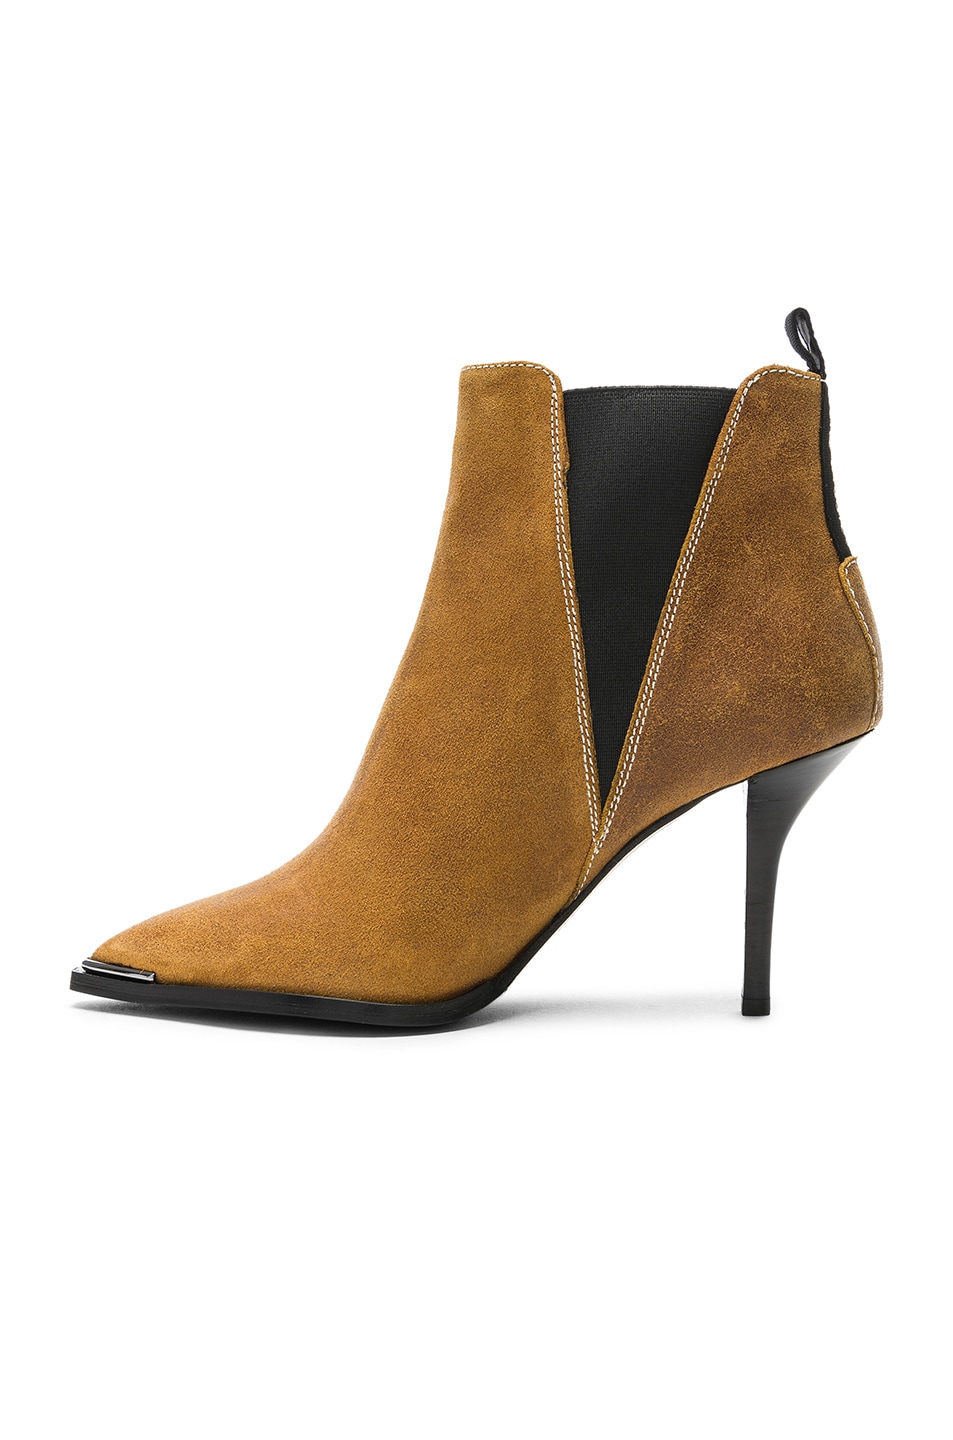 Acne Studios Waxed Suede Jemma Boots in Caramel Brown | FWRD